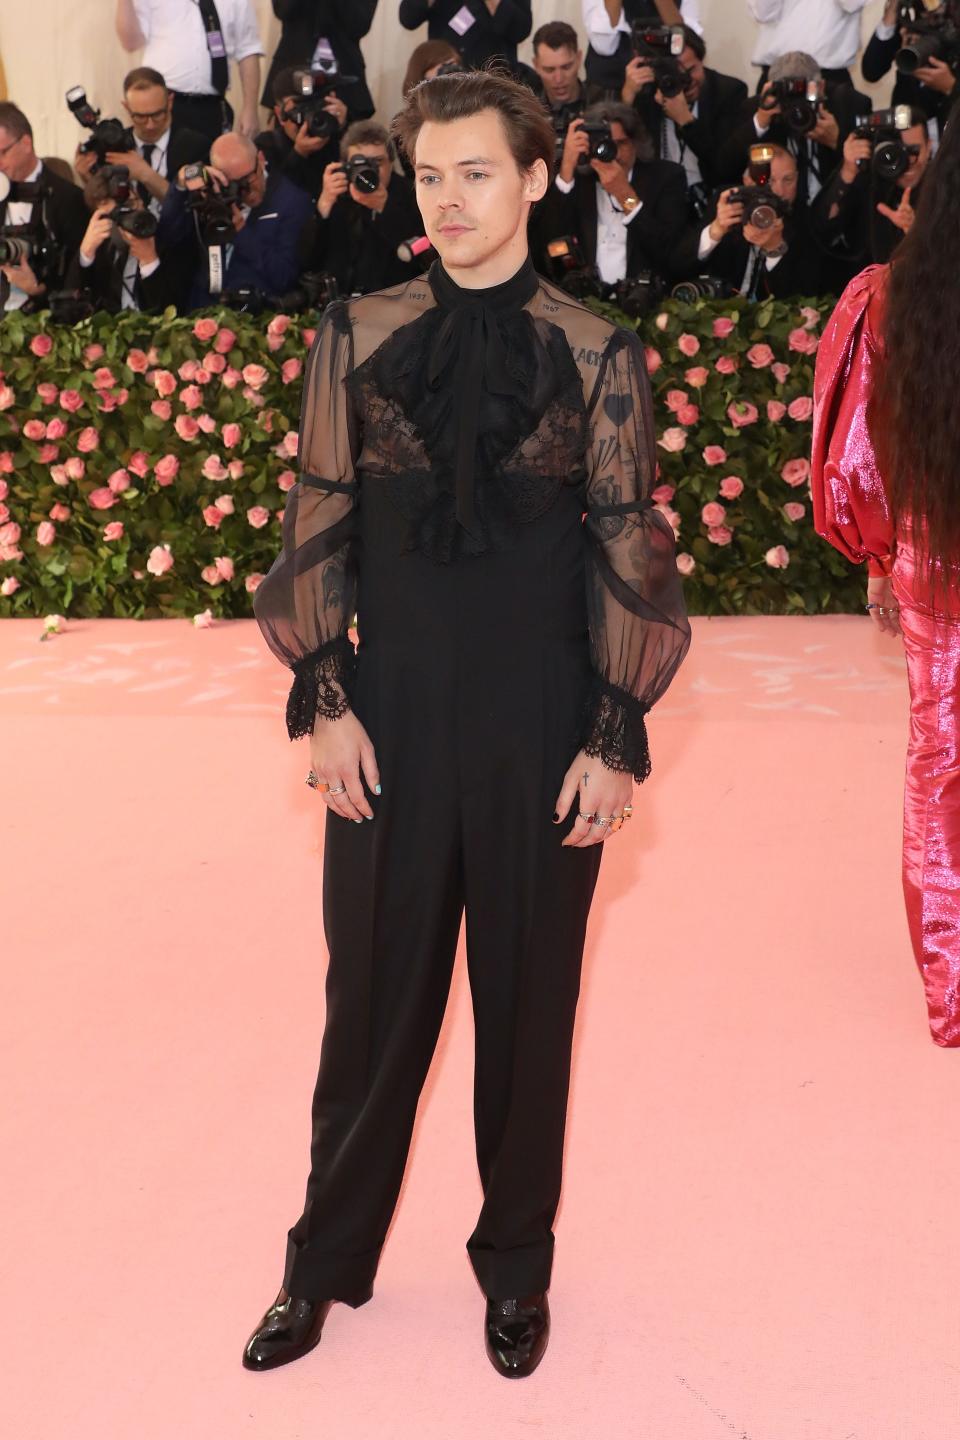 Harry Styles at the 2019 Met Gala in high-waisted black trousers with a puffy, sheer top.